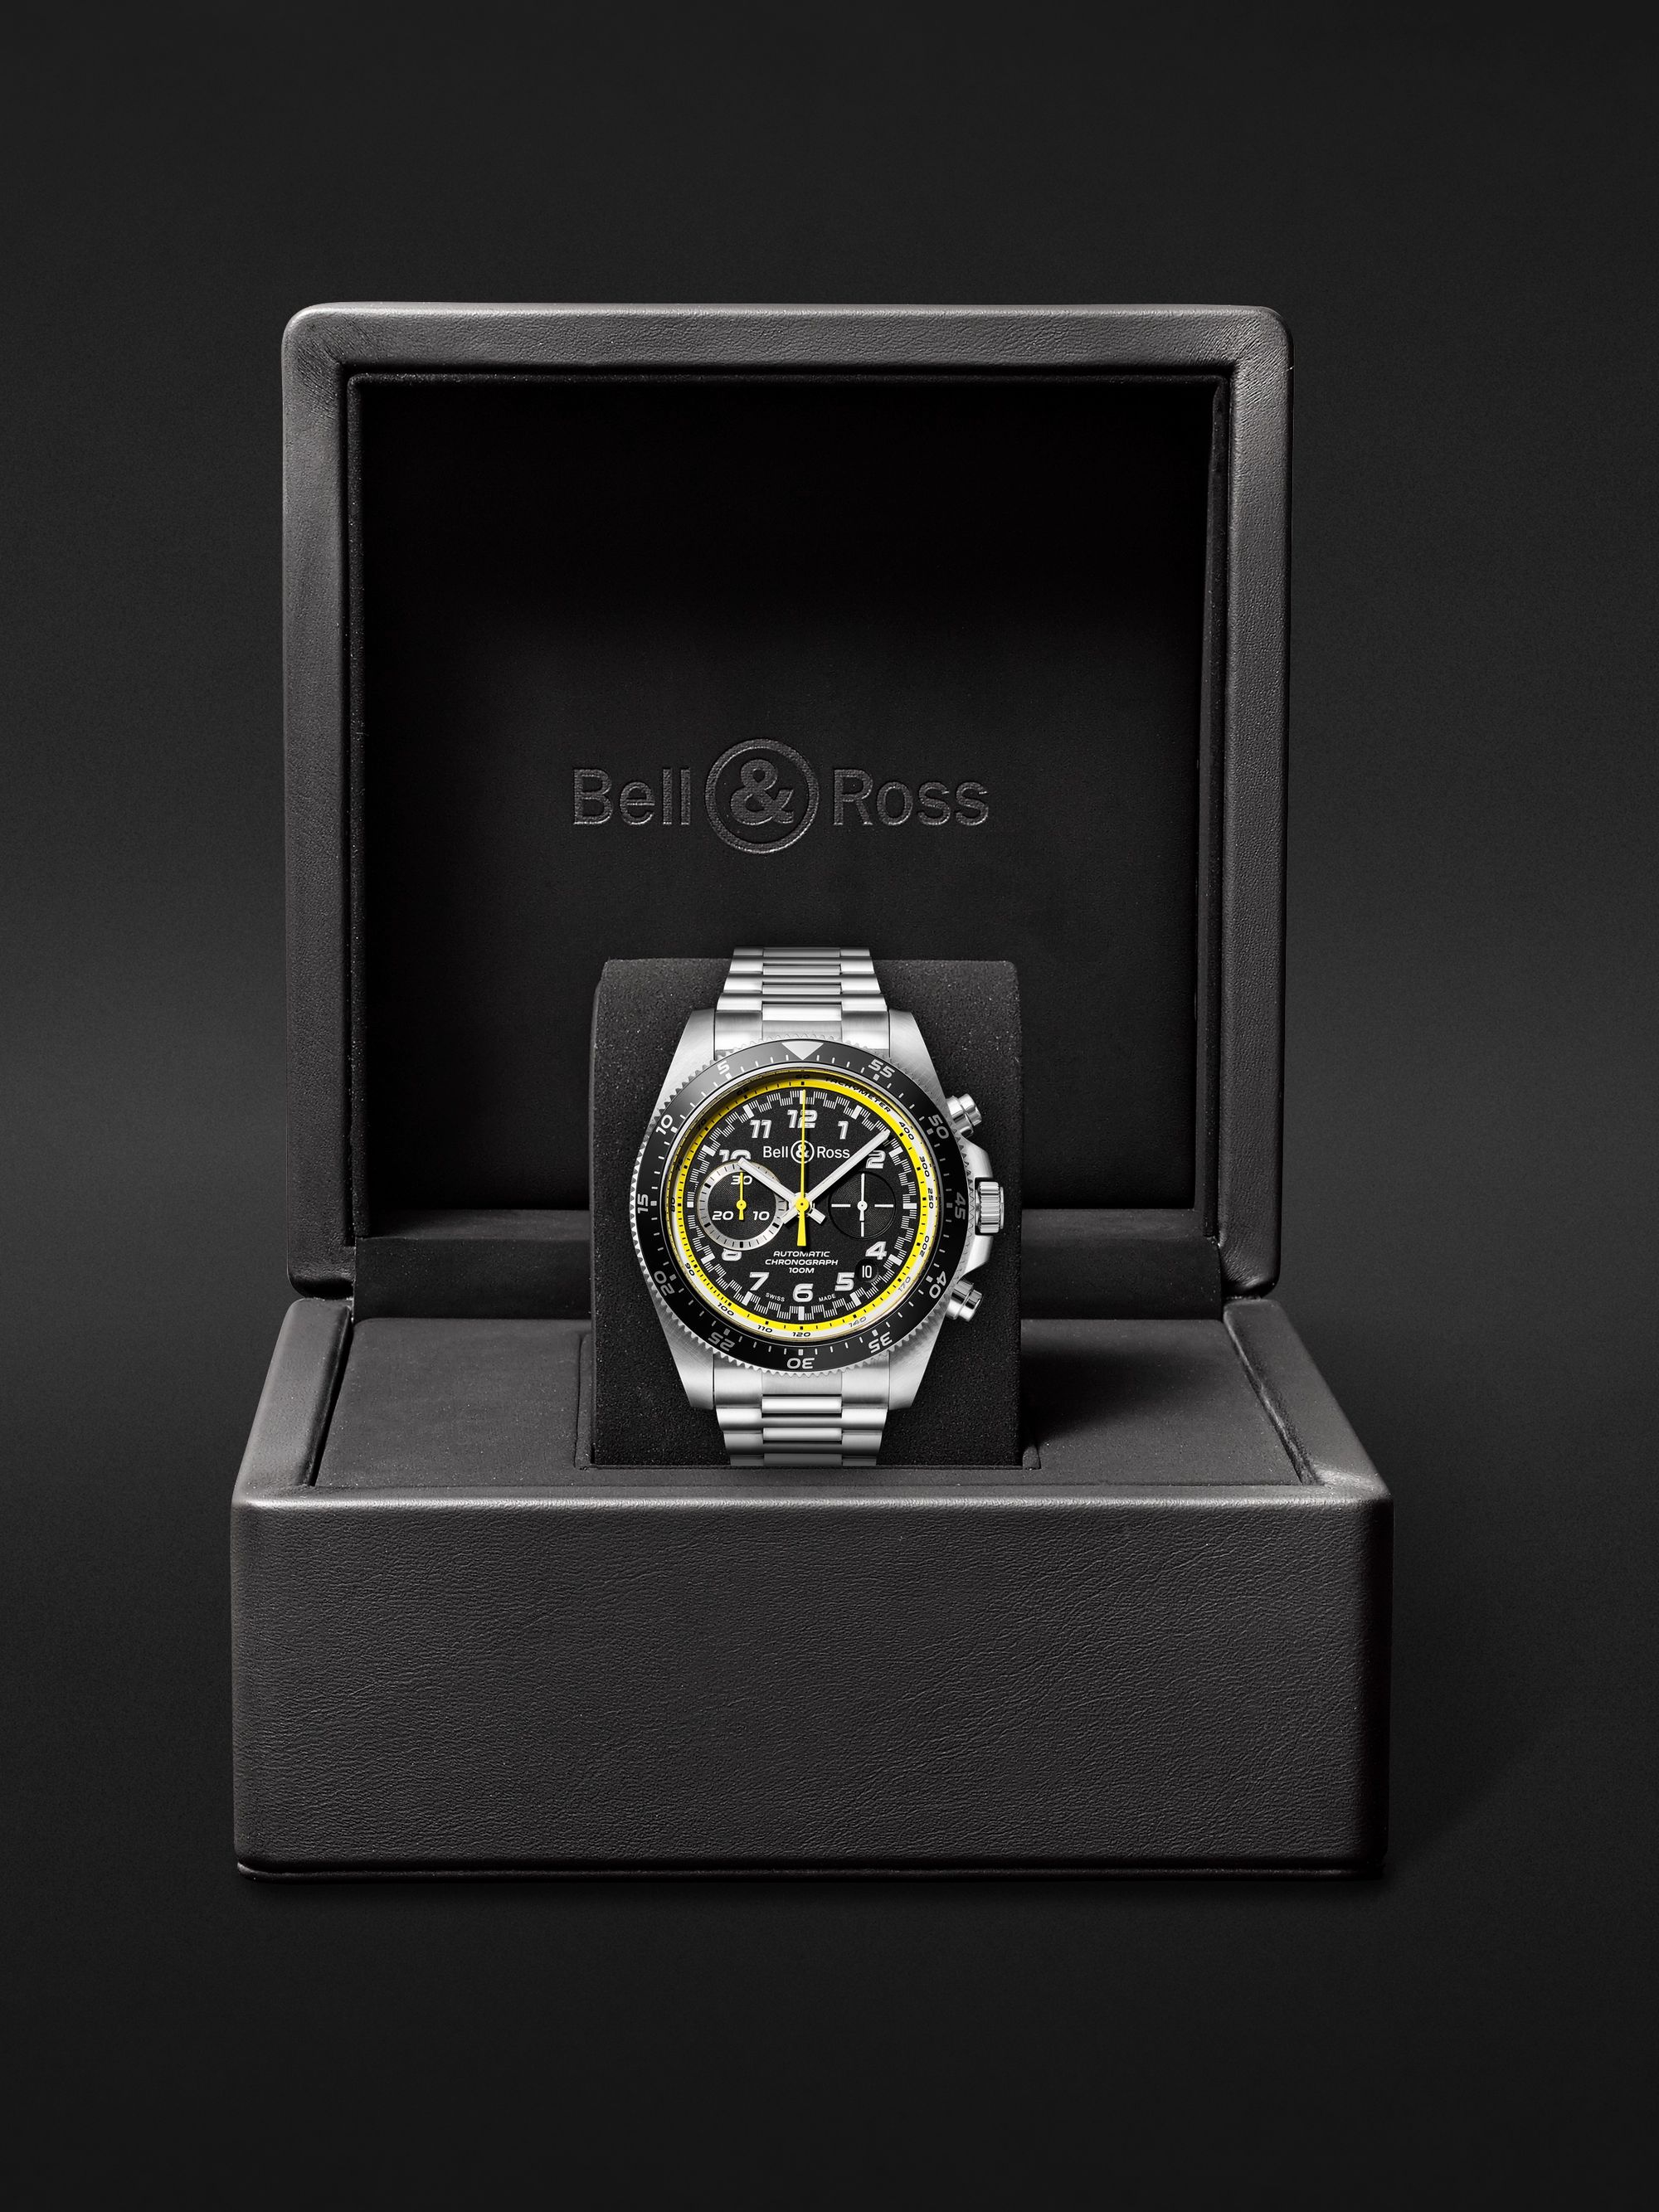 BELL & ROSS BR V3-94 R.S.20 Limited Edition Automatic Chronograph 43mm Stainless Steel Watch, Ref. No. BRV394-RS20/SST